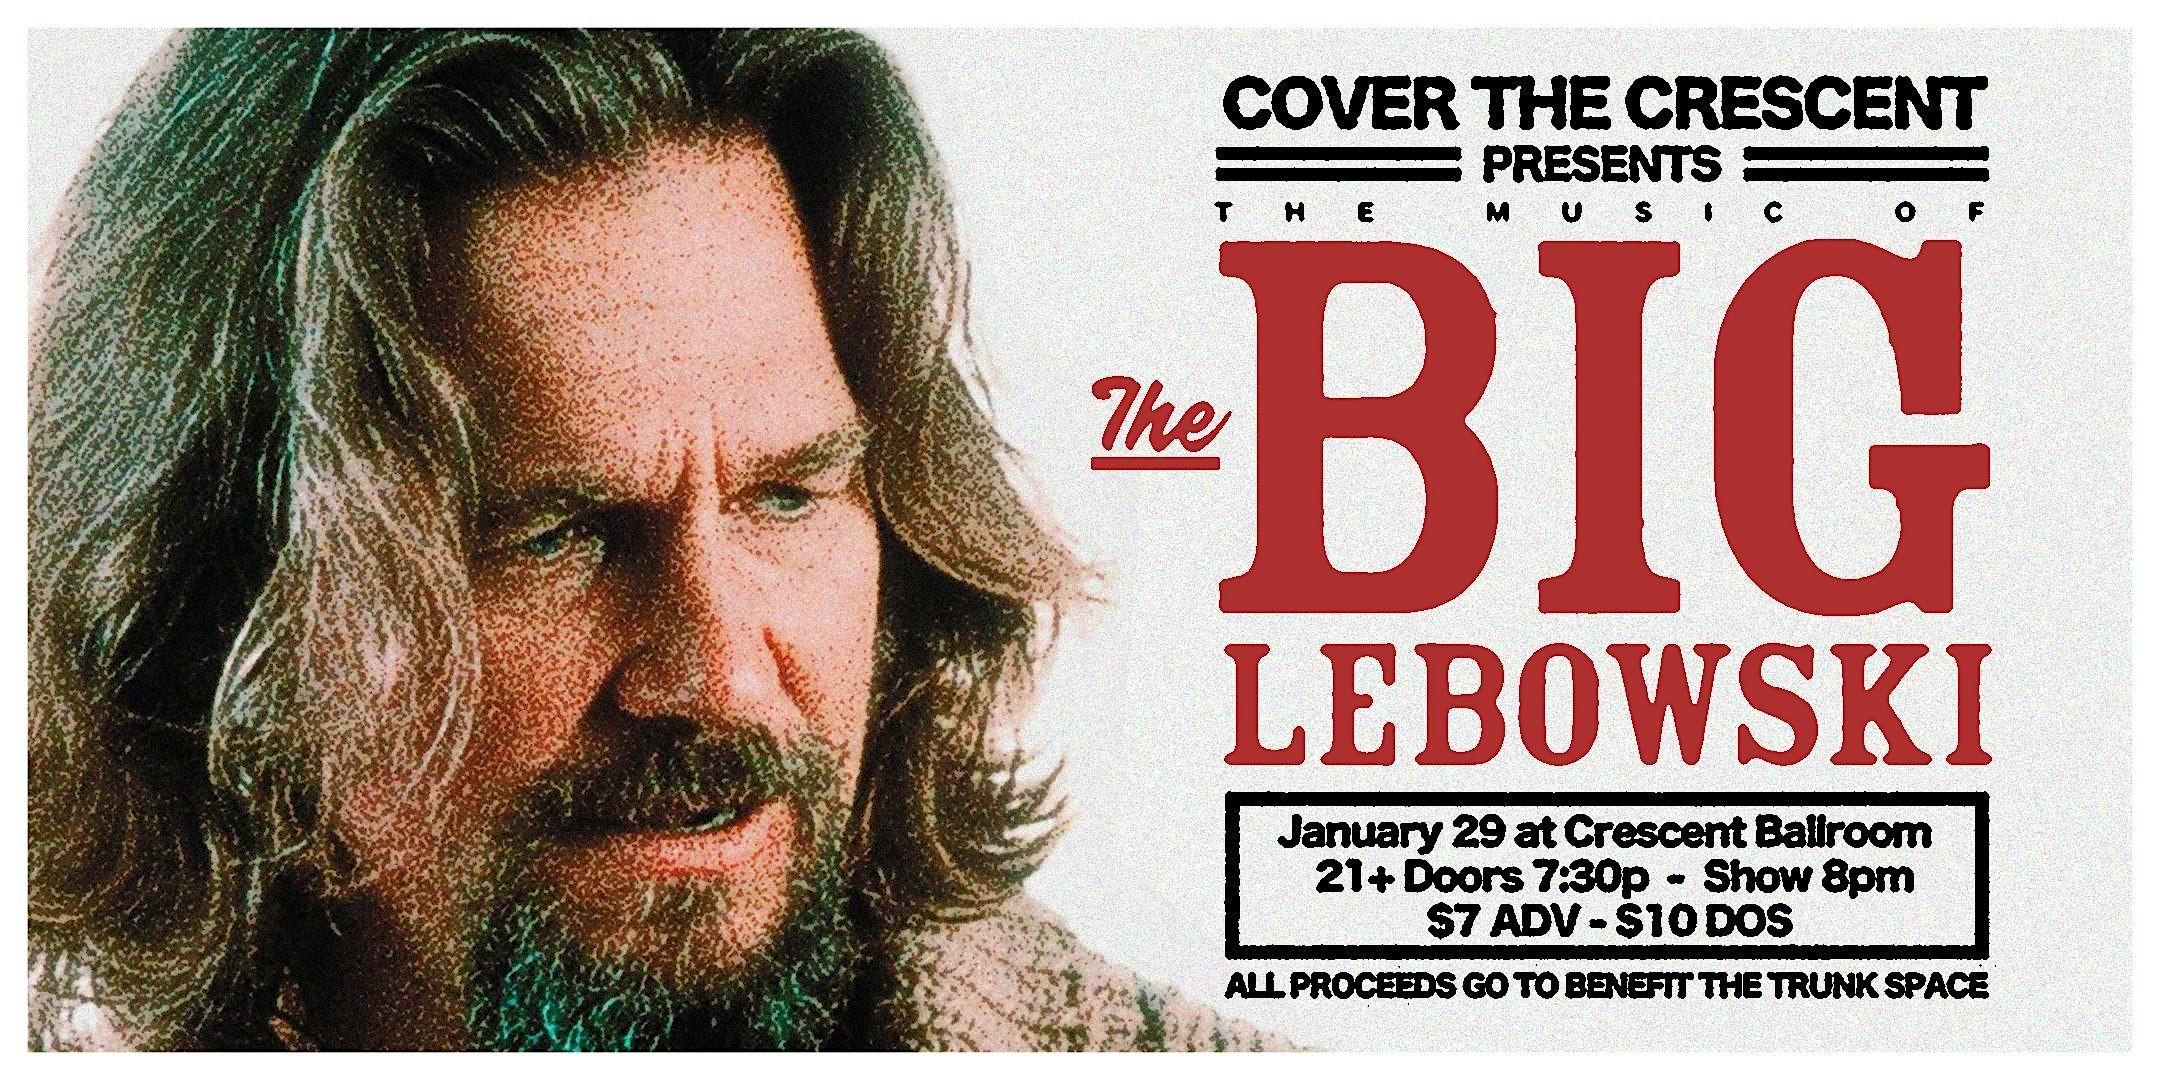 COVER THE CRESCENT Presents: A Music Tribute To THE BIG LEBOWSKI